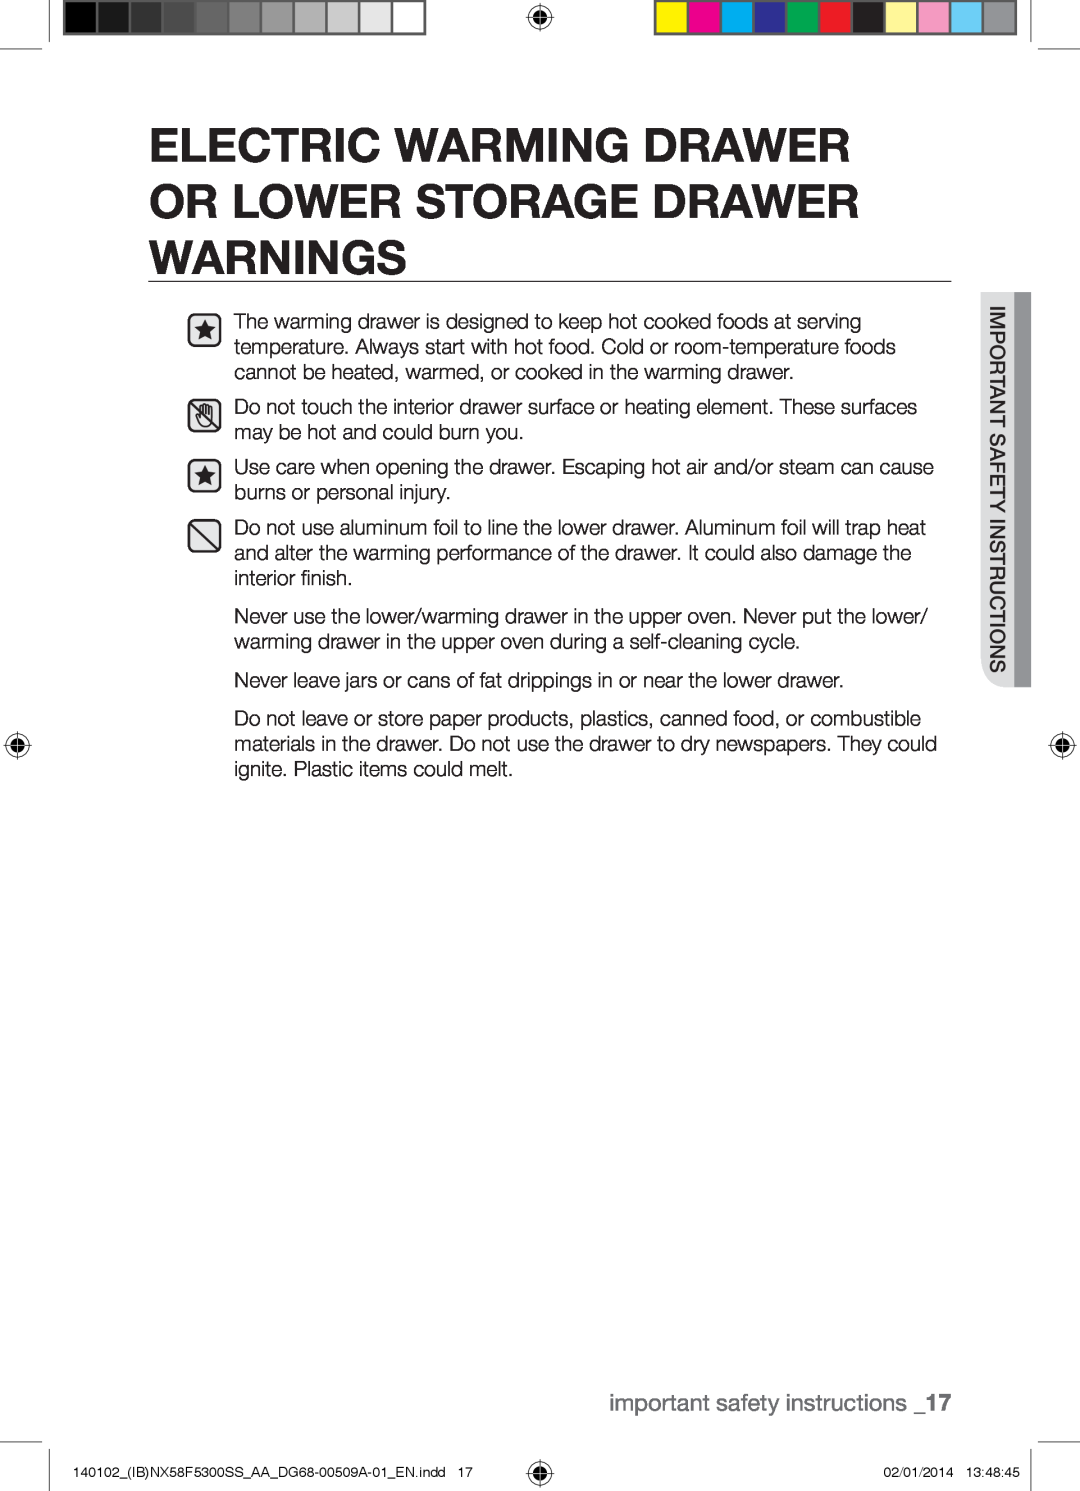 Samsung NX58F5500SW user manual Electric Warming Drawer Or Lower Storage Drawer Warnings, important safety instructions 